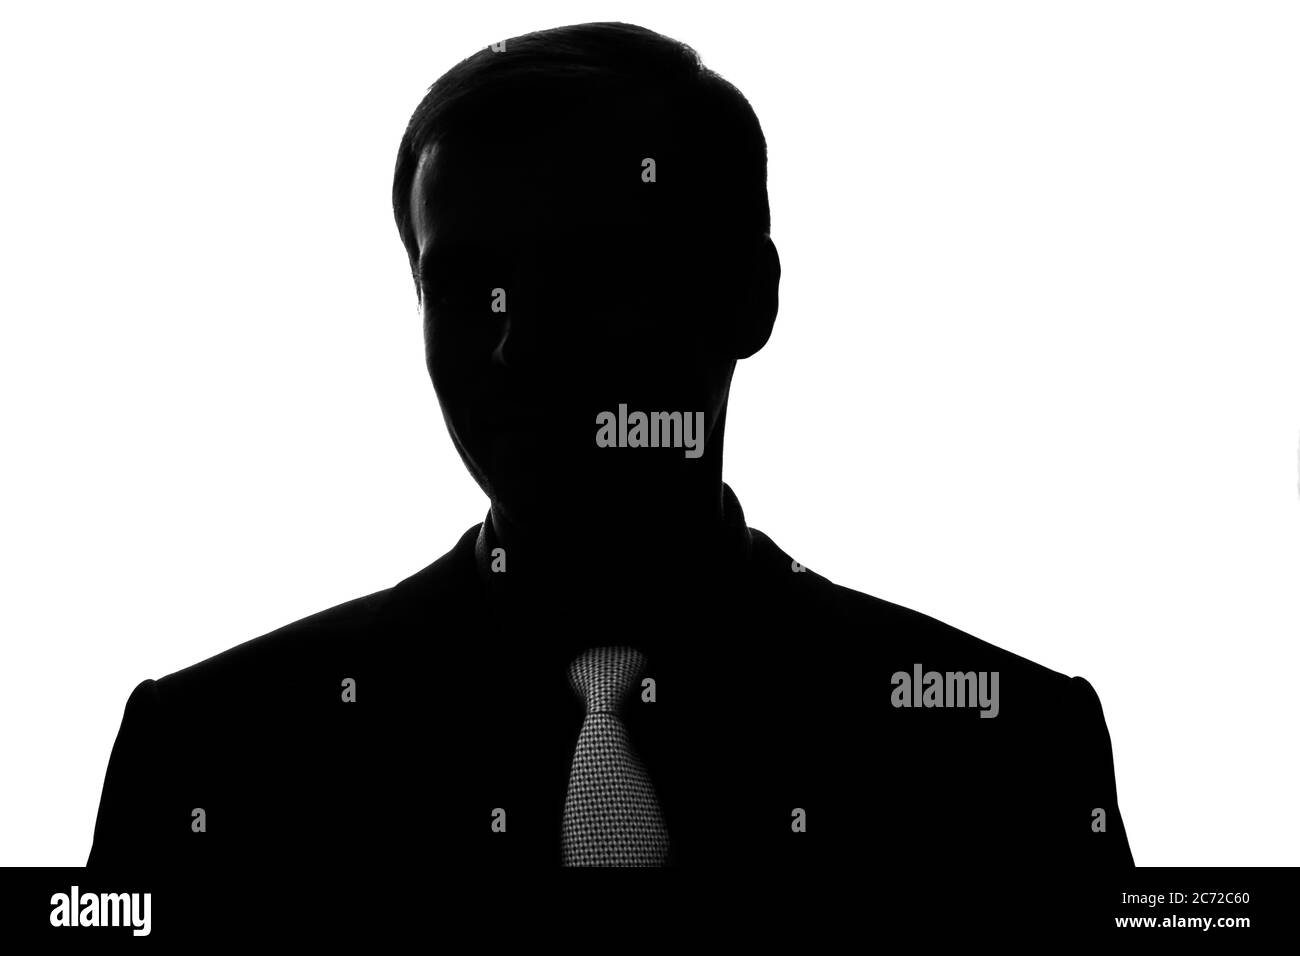 Portrait young man in suit, tie in front view - silhouette Stock Photo